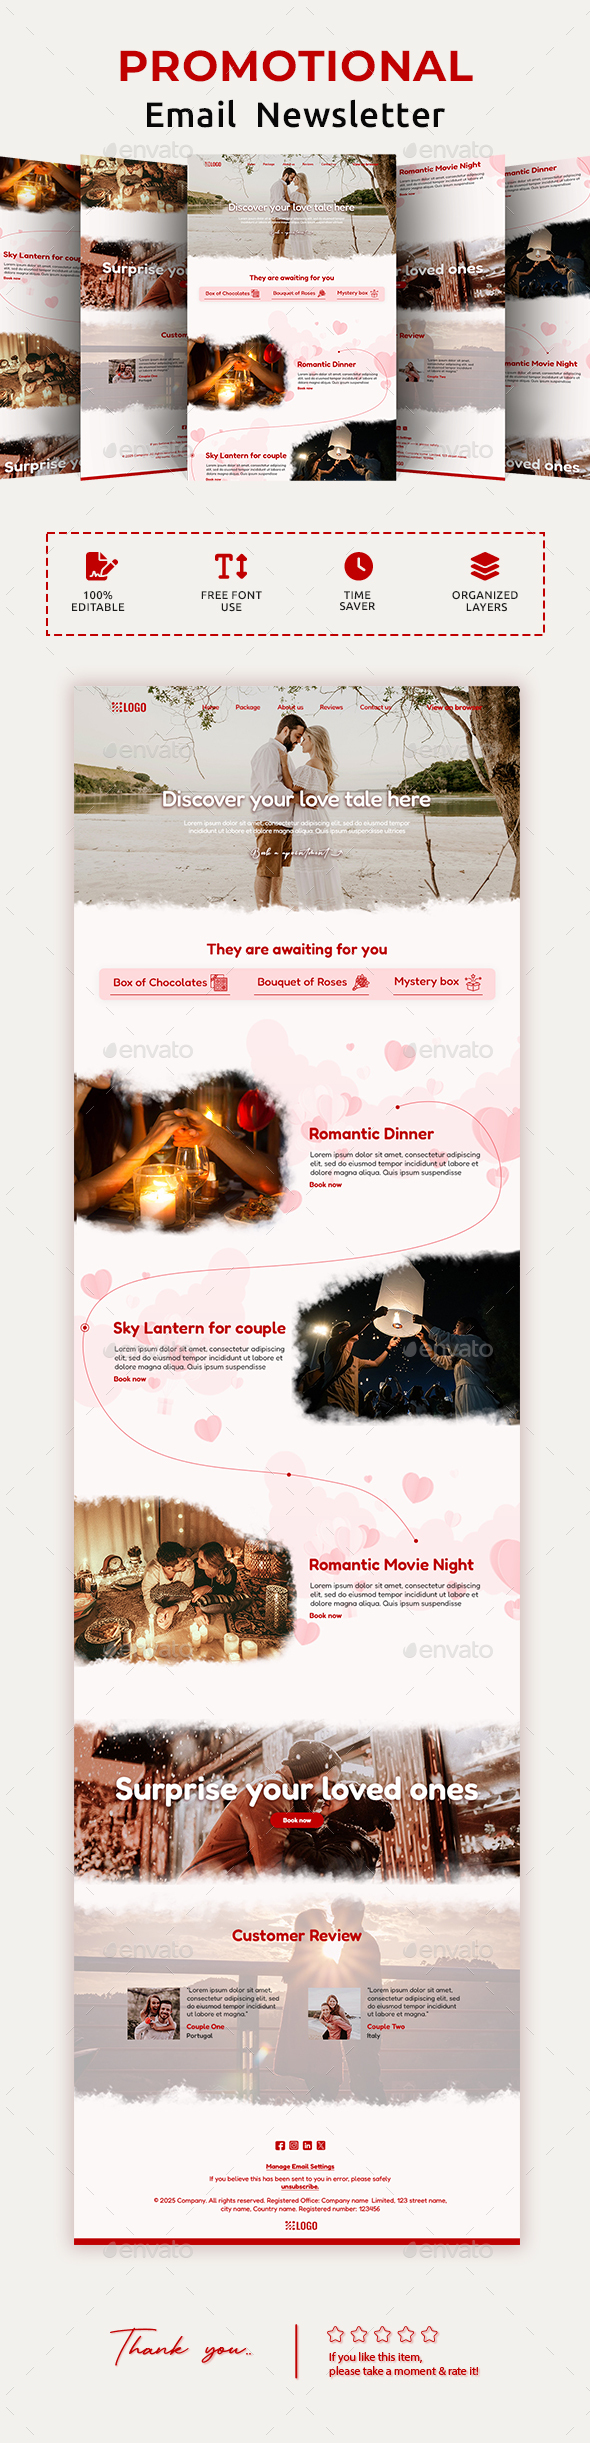 [DOWNLOAD]Hotel Suite Email Newsletter PSD Template - Valentine's Day